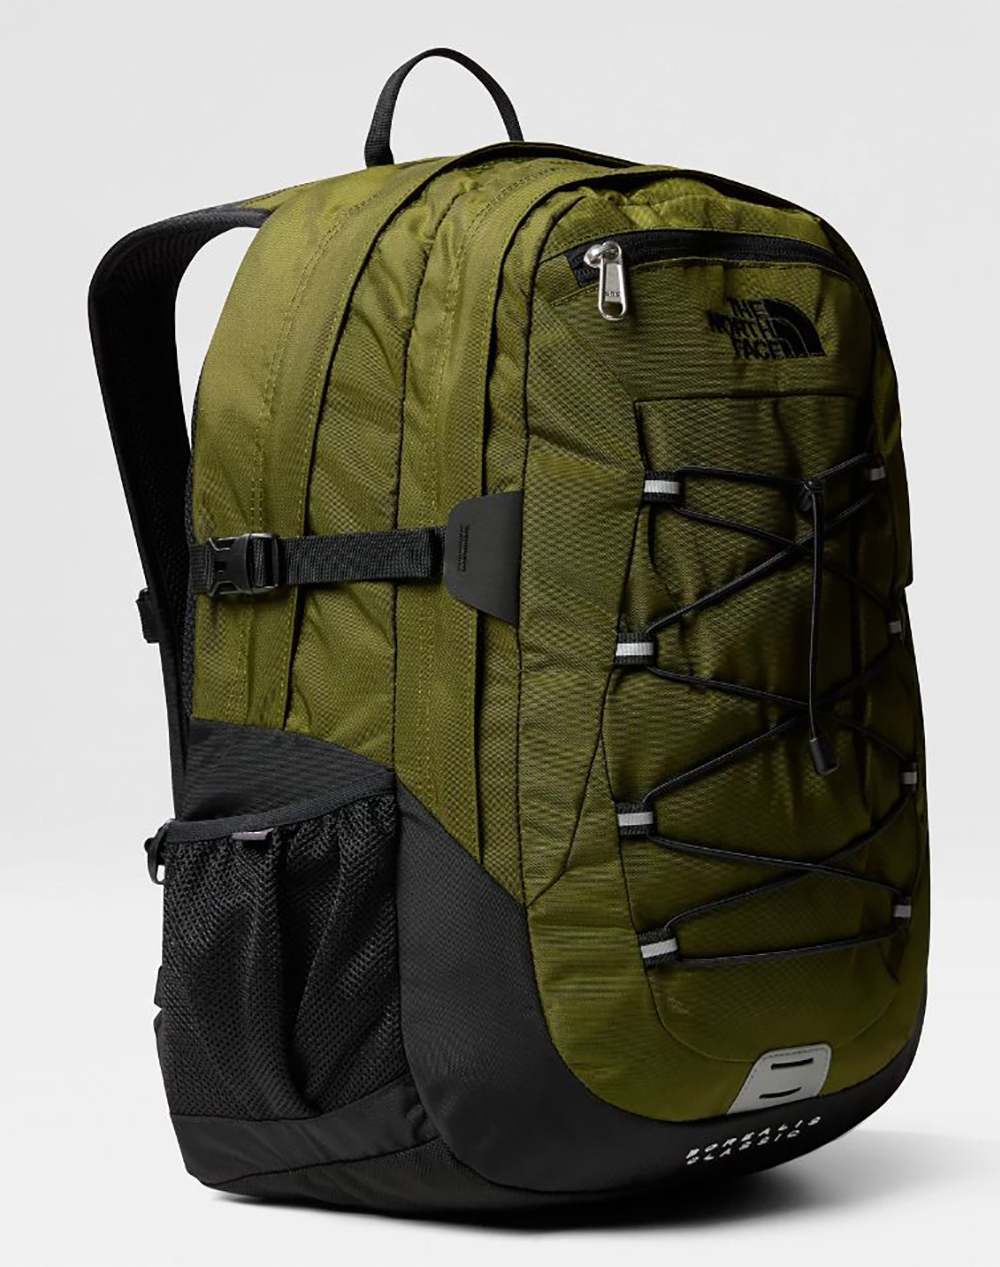 THE NORTH FACE BOREALIS CLASSIC (Διαστάσεις: 48 x 34.5 x 18.5 εκ) NF00CF9C-NFRMO Olive